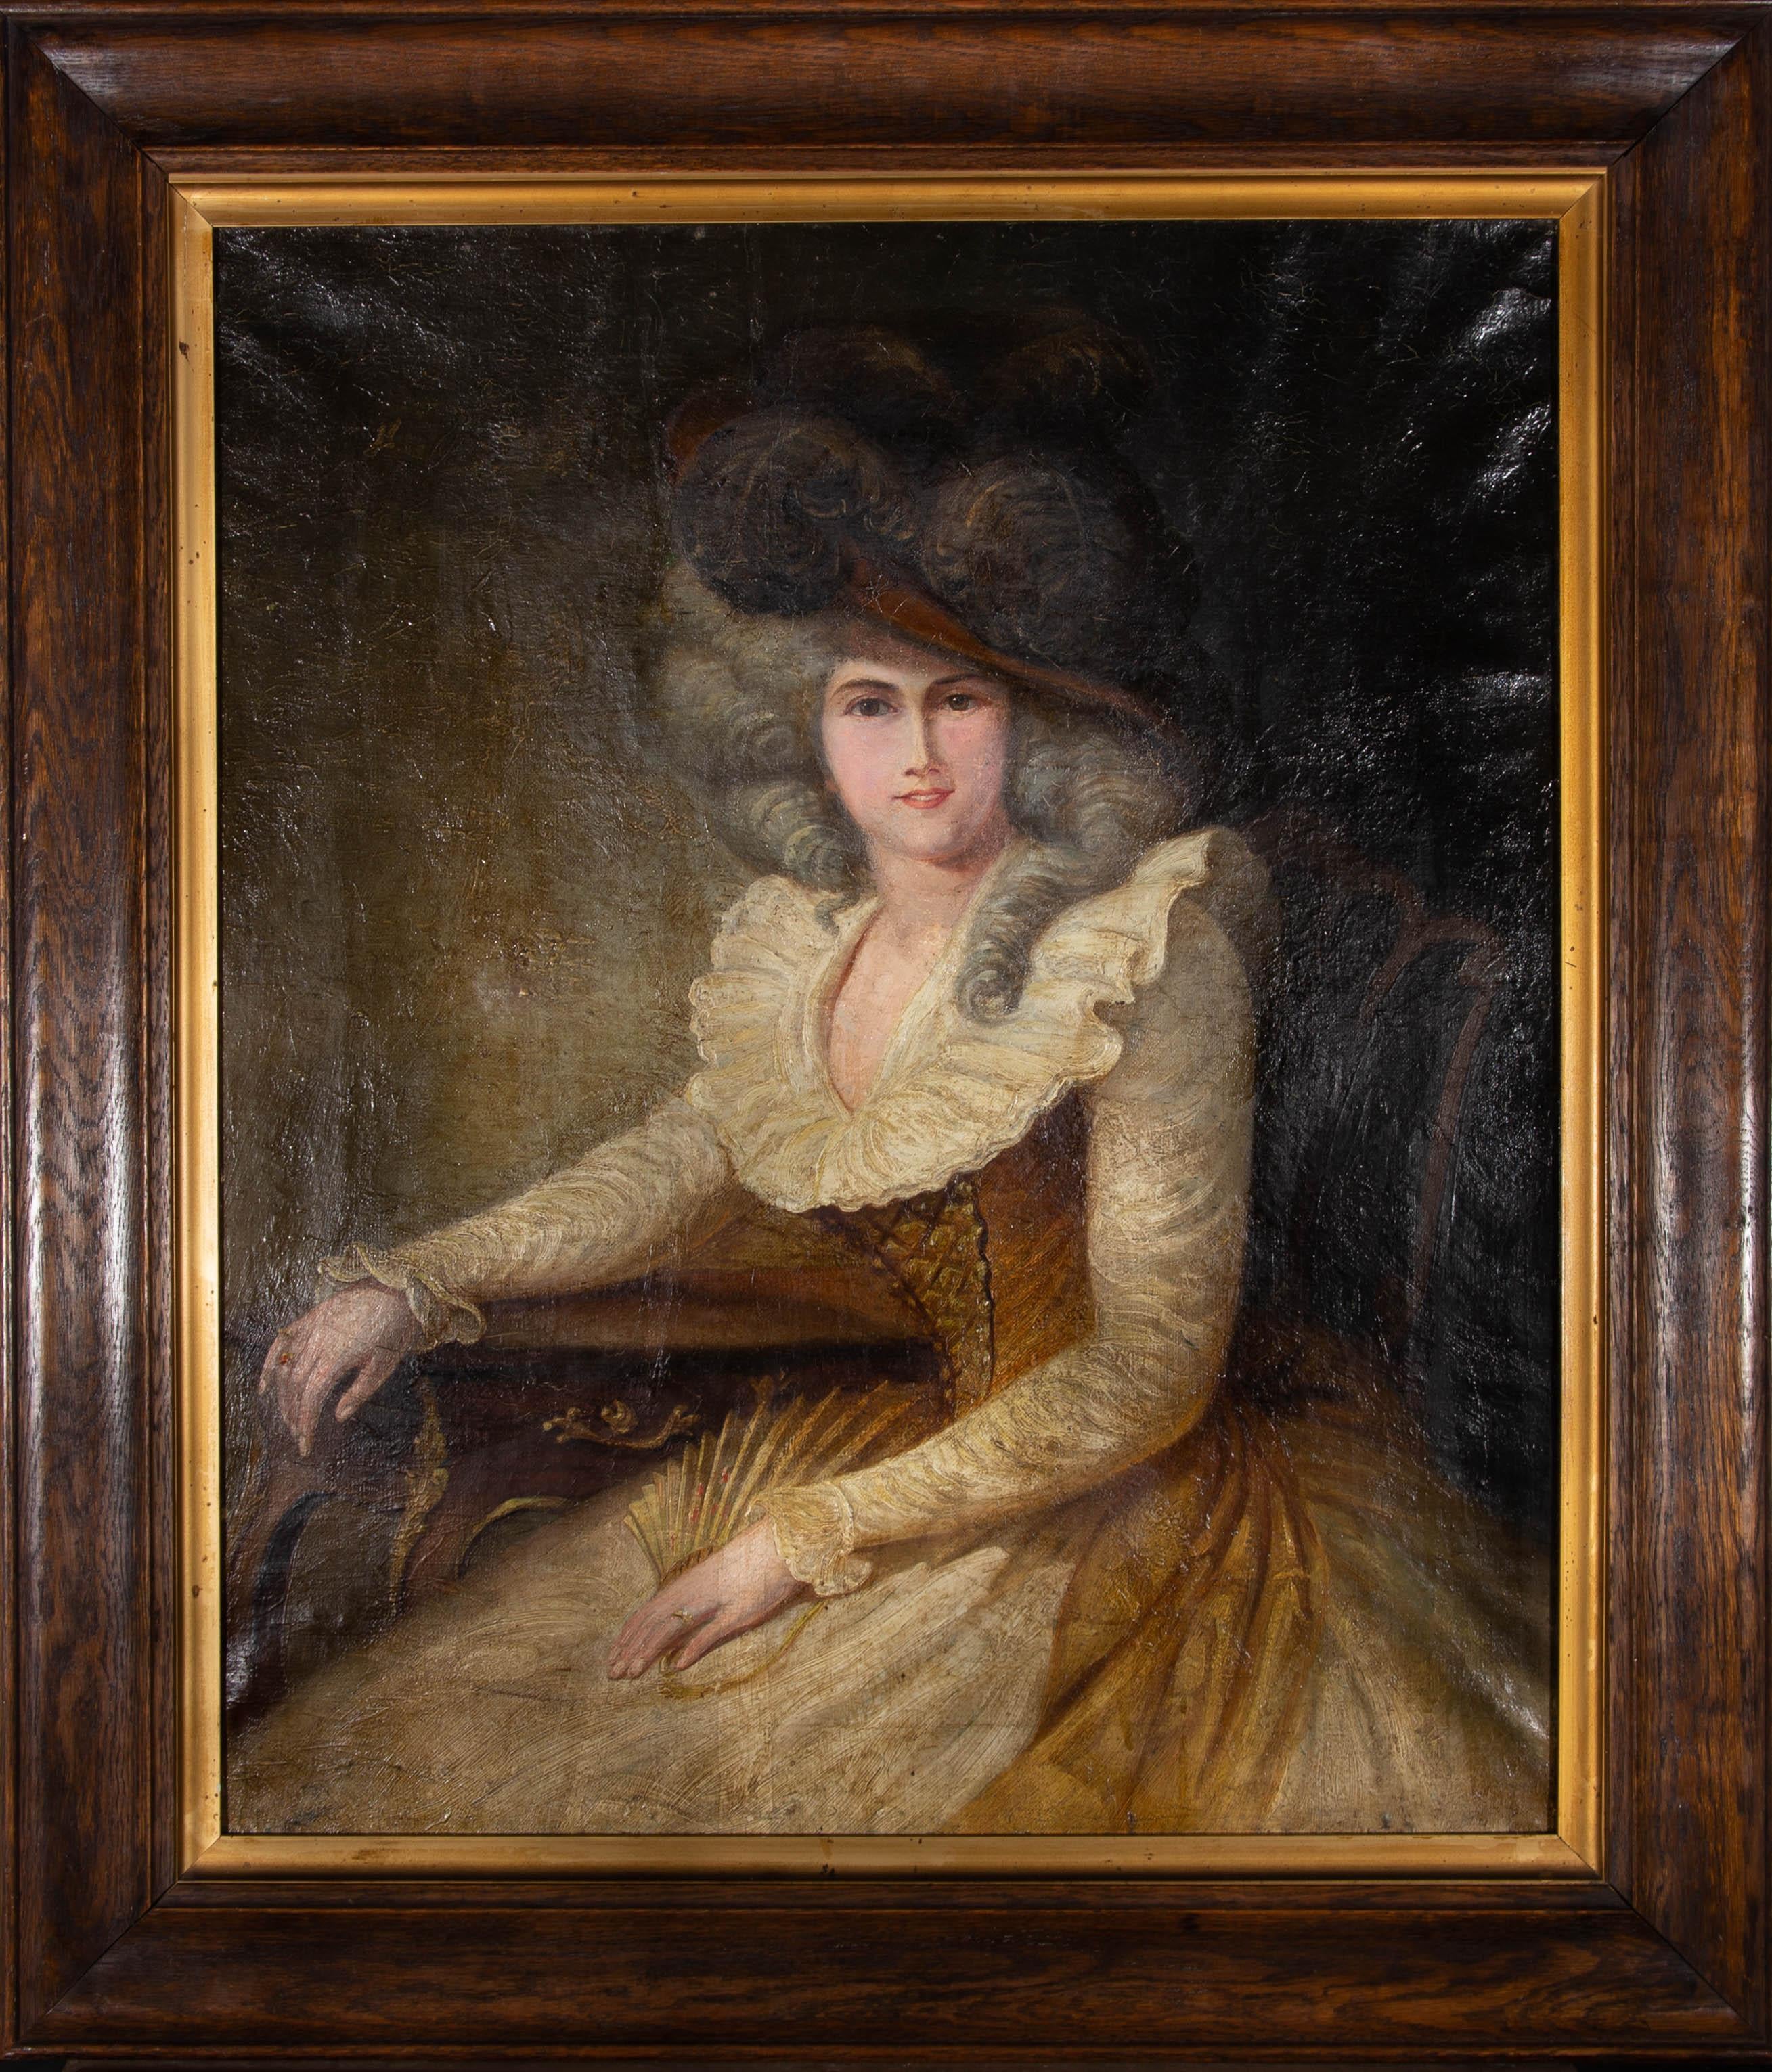 Unknown Portrait Painting - Late 19th Century Oil - Elegant Lady